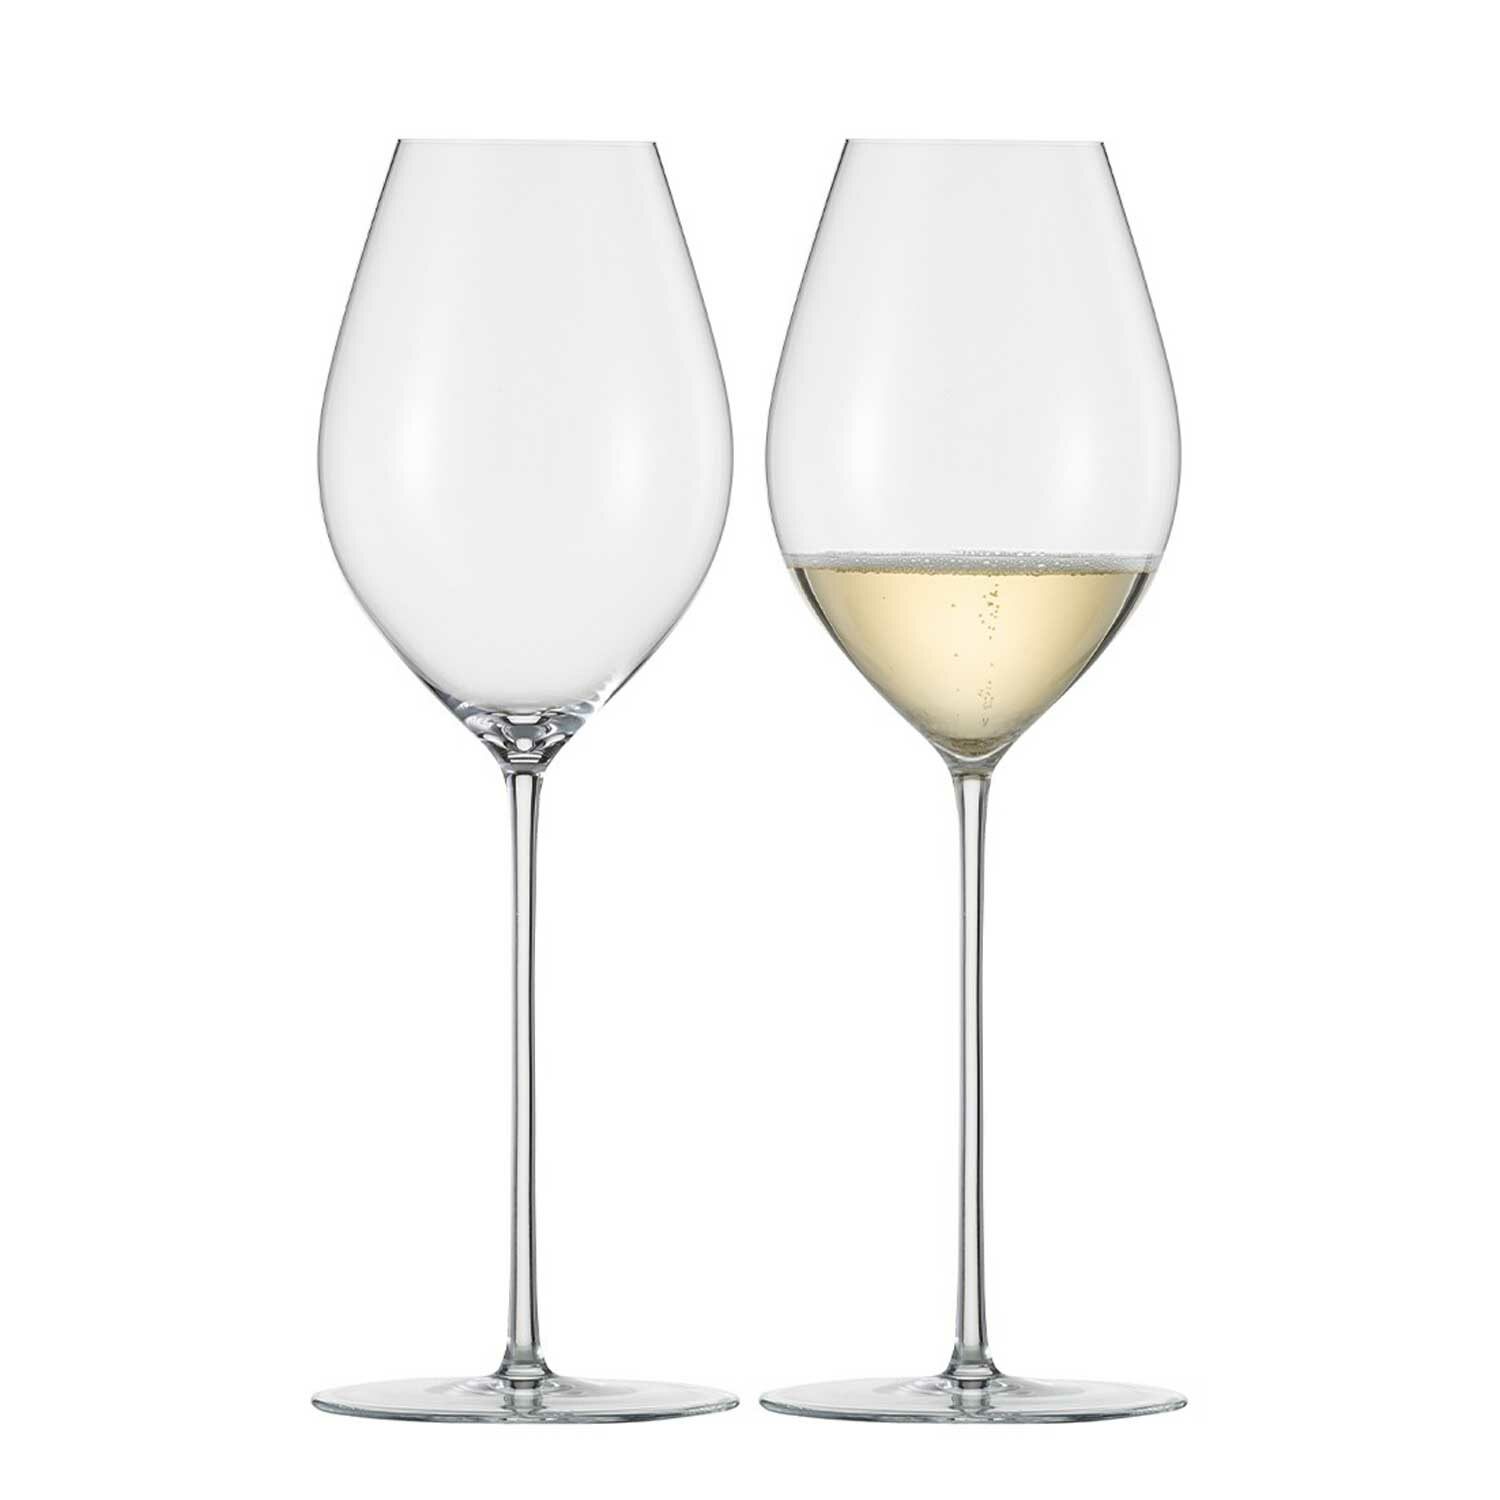 UNITY 2 champagne crystal glasses